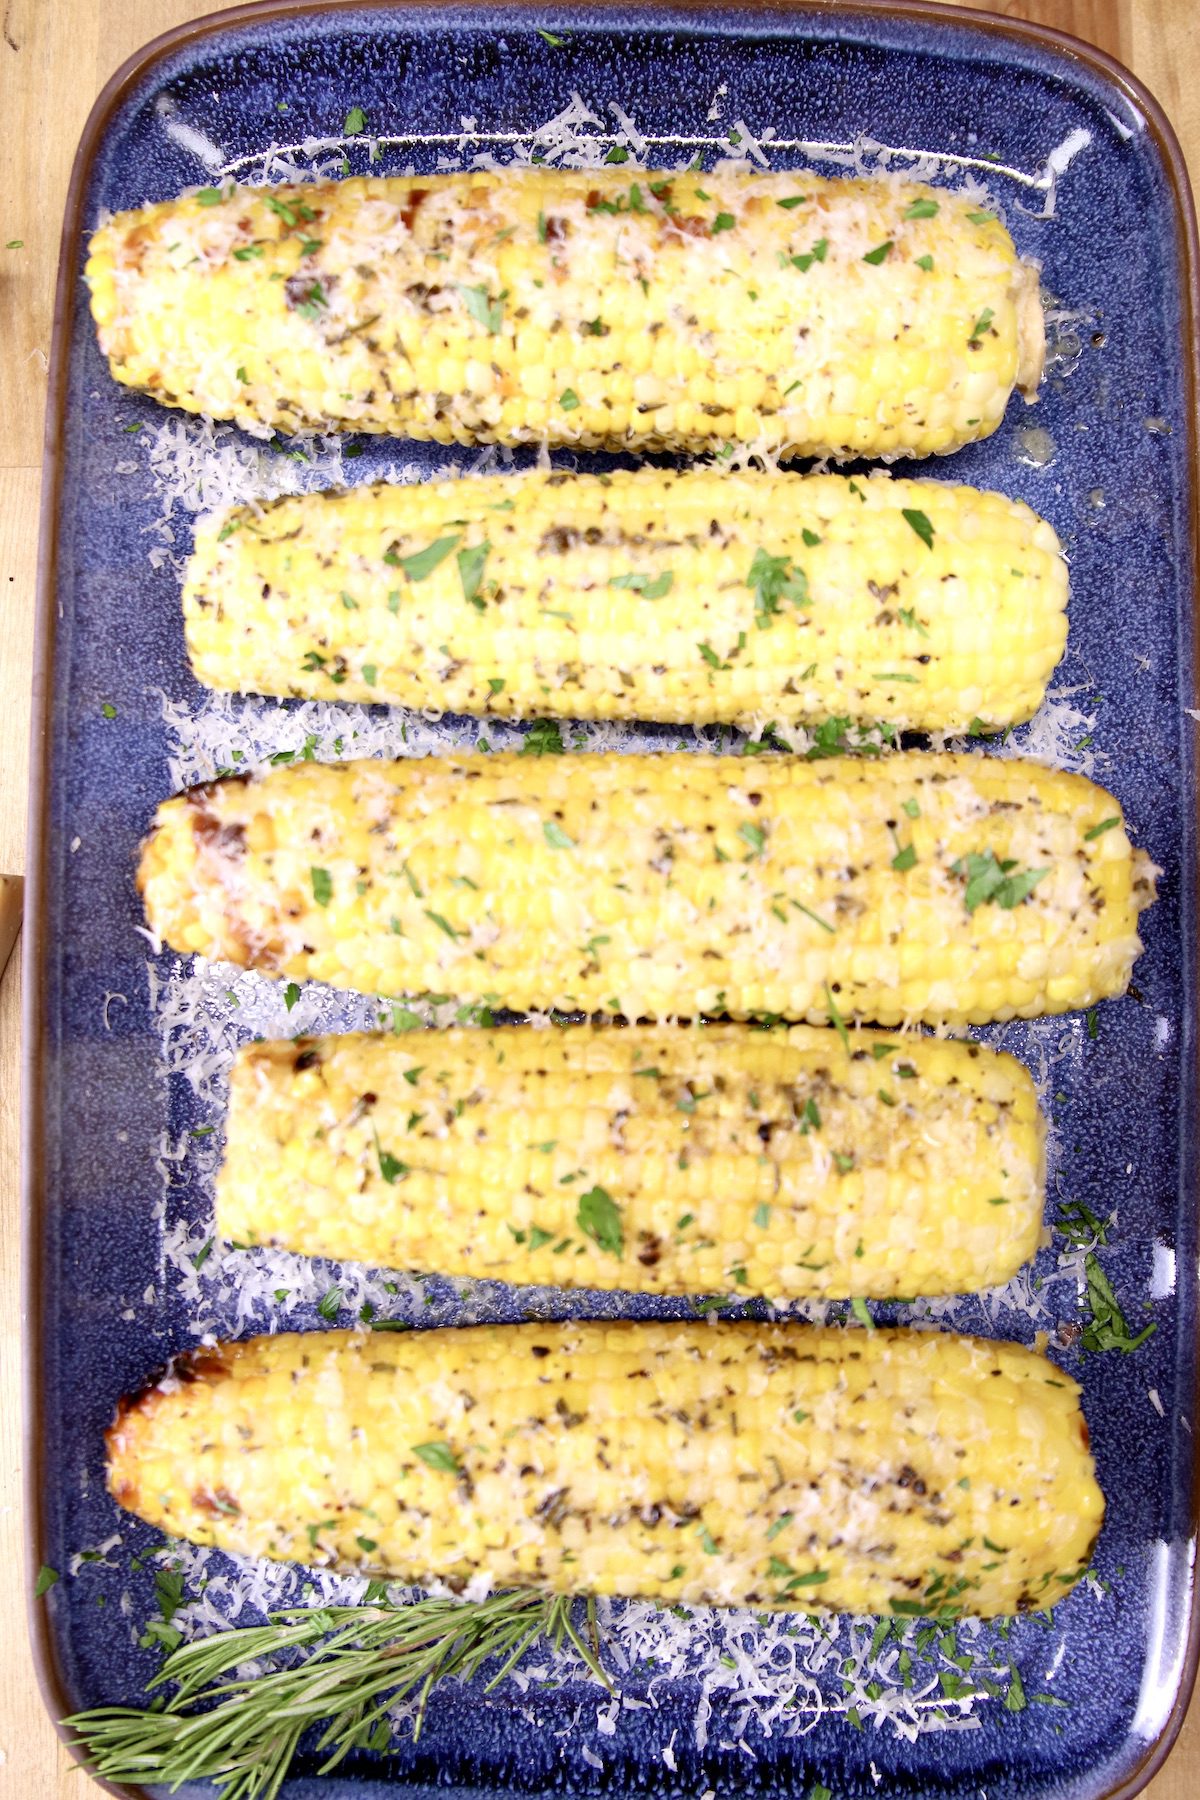 Platter of 5 ears of corn on the cob with herb butter